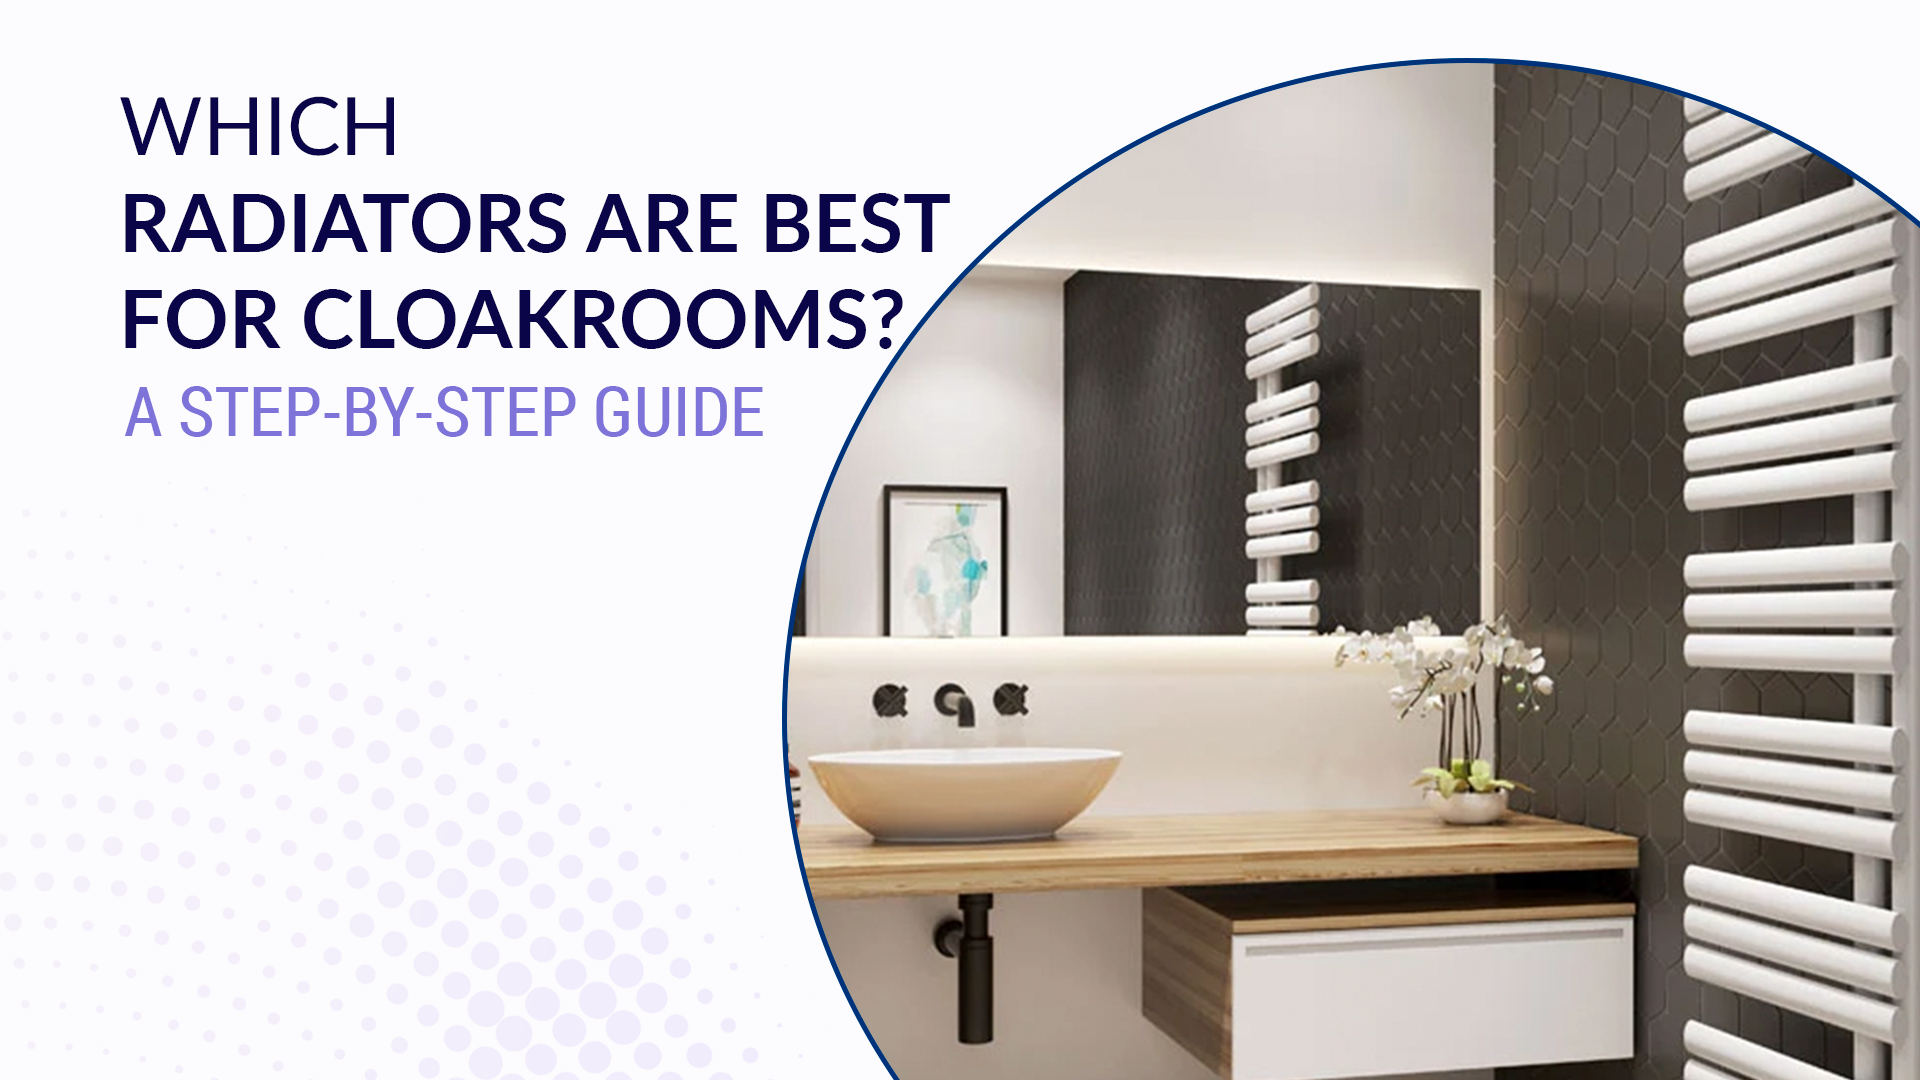 Which Radiators are Best for Cloakrooms? A Step-by-Step Guide 